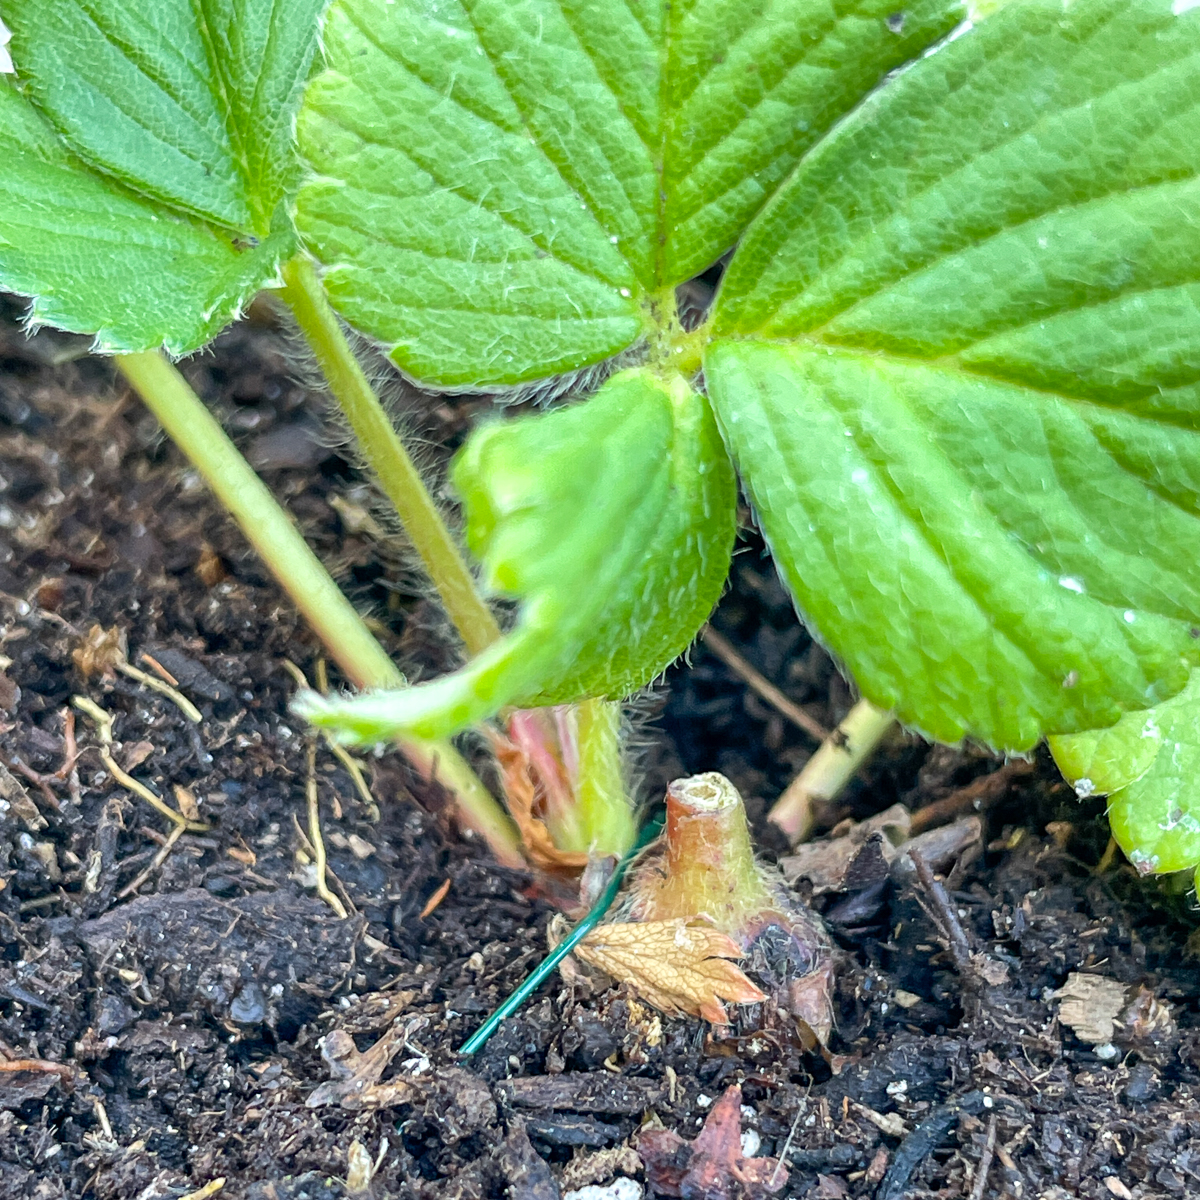 strawberry runner pinned to the soil surface to encourage rooting